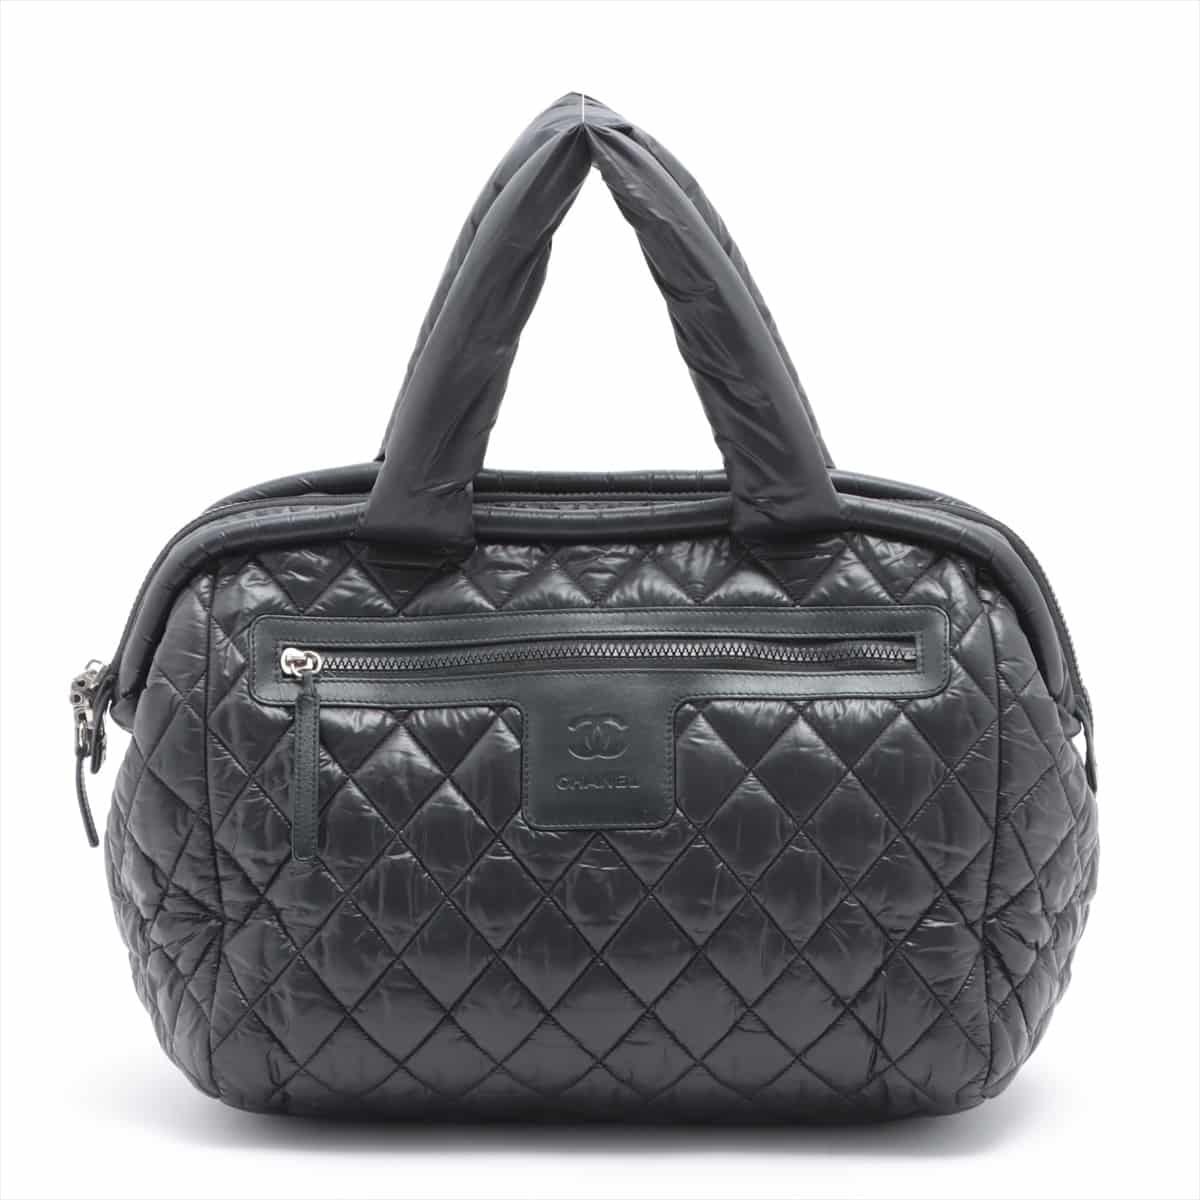 Chanel Coco Cocoon Nylon Hand bag Black Silver Metal fittings 17XXXXXX